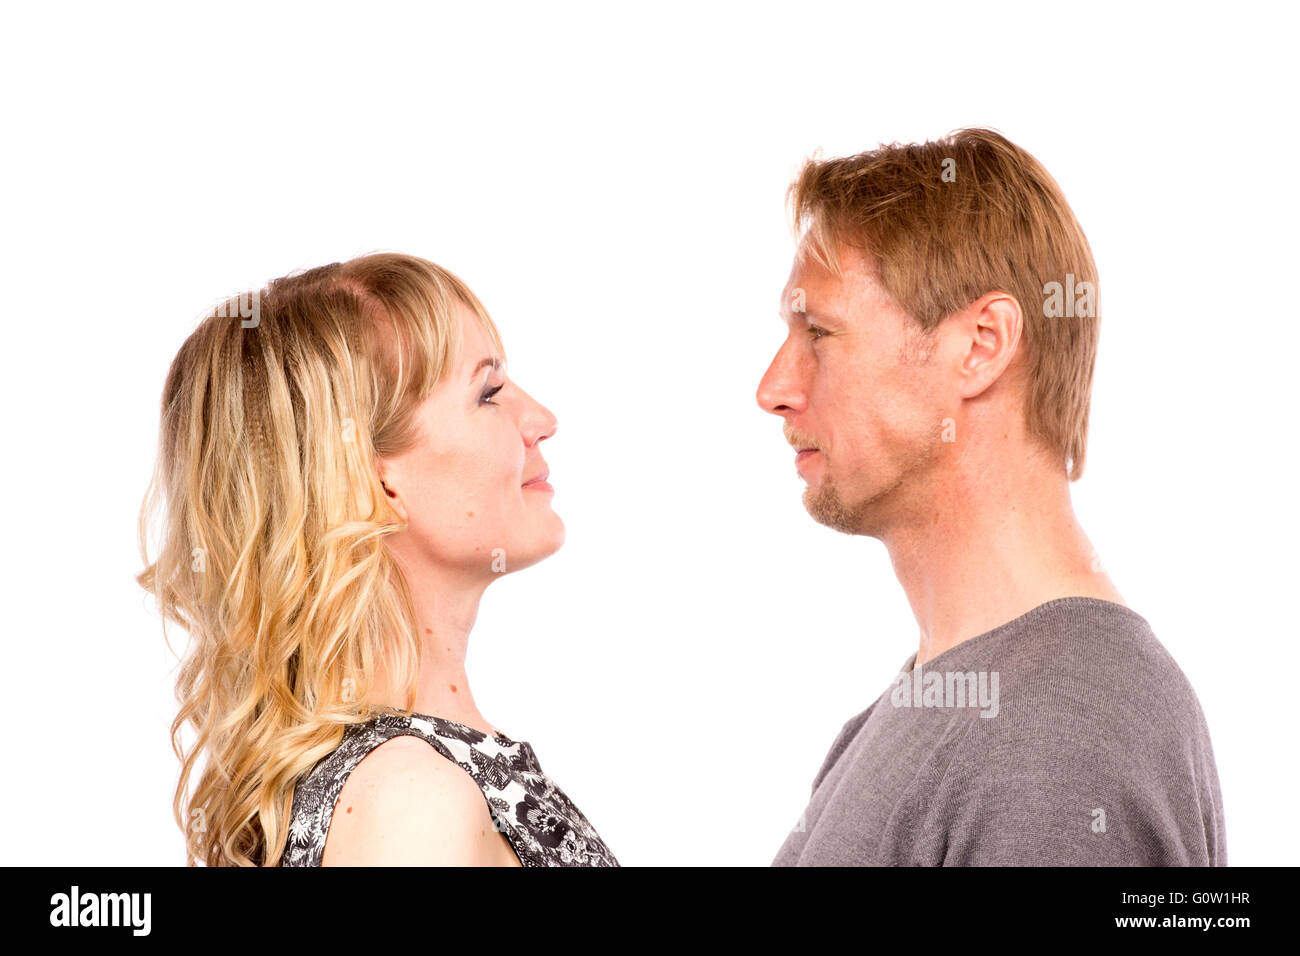 Portrait of happy couple isolated on white background. Attractive man and woman being playful. Stock Photo